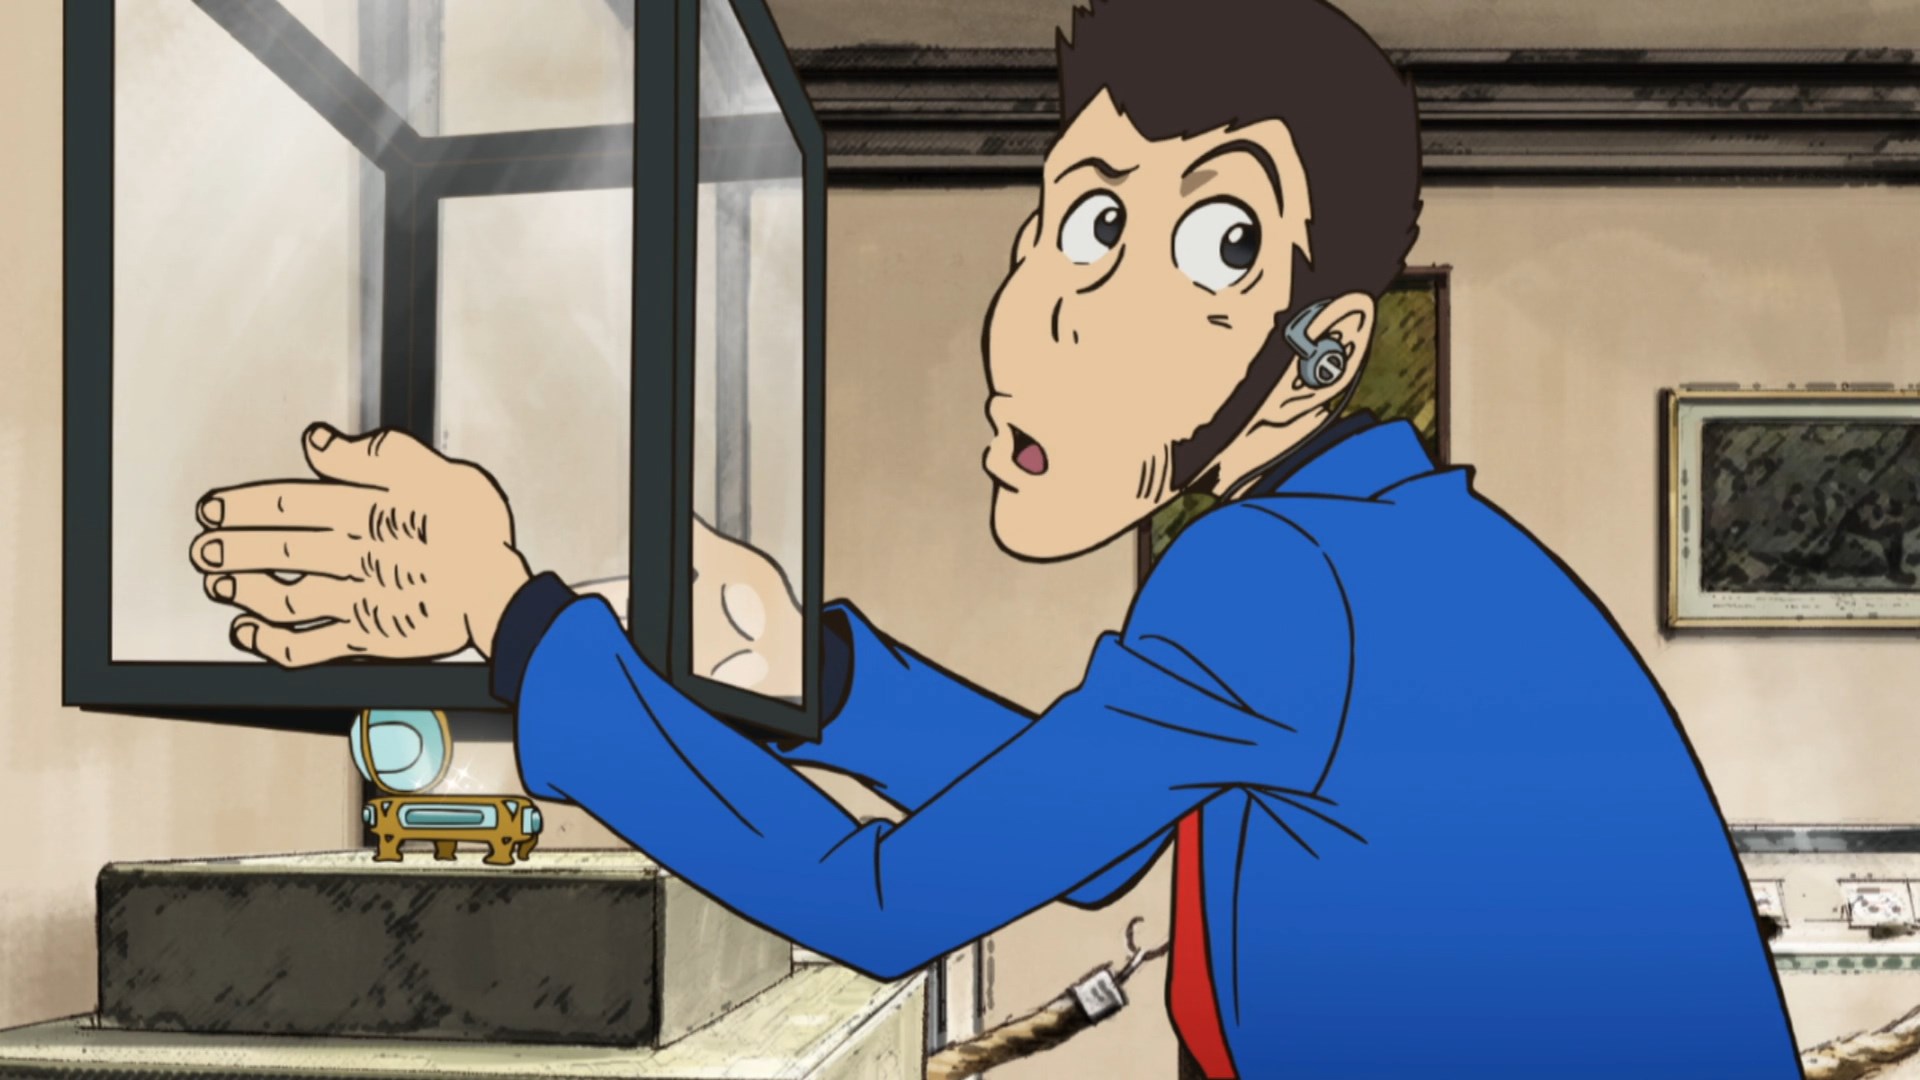 Lupin The Third #8